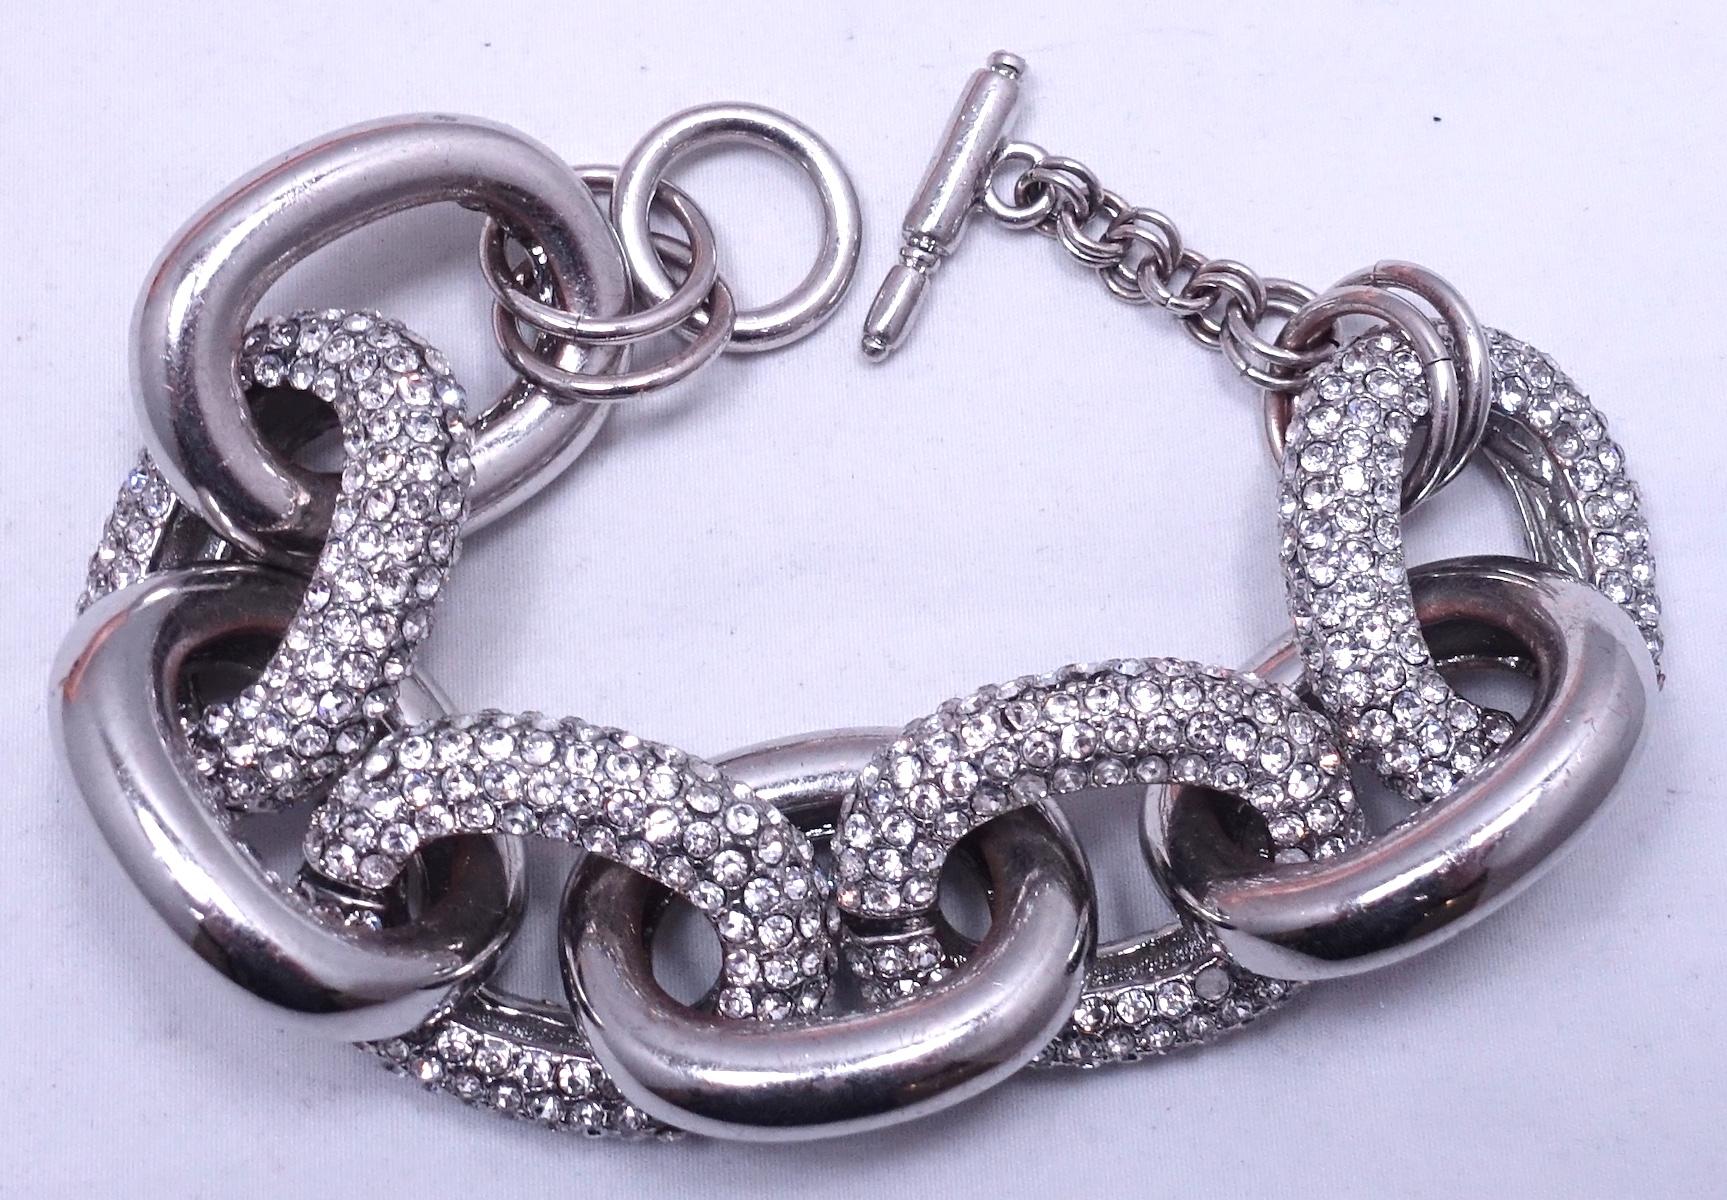 This Kenneth Lane bracelet features a link design with clear crystal accents in a silver tone setting.  In excellent condition, this bracelet measures 9” x 1-1/8” with a toggle bolt closure. 